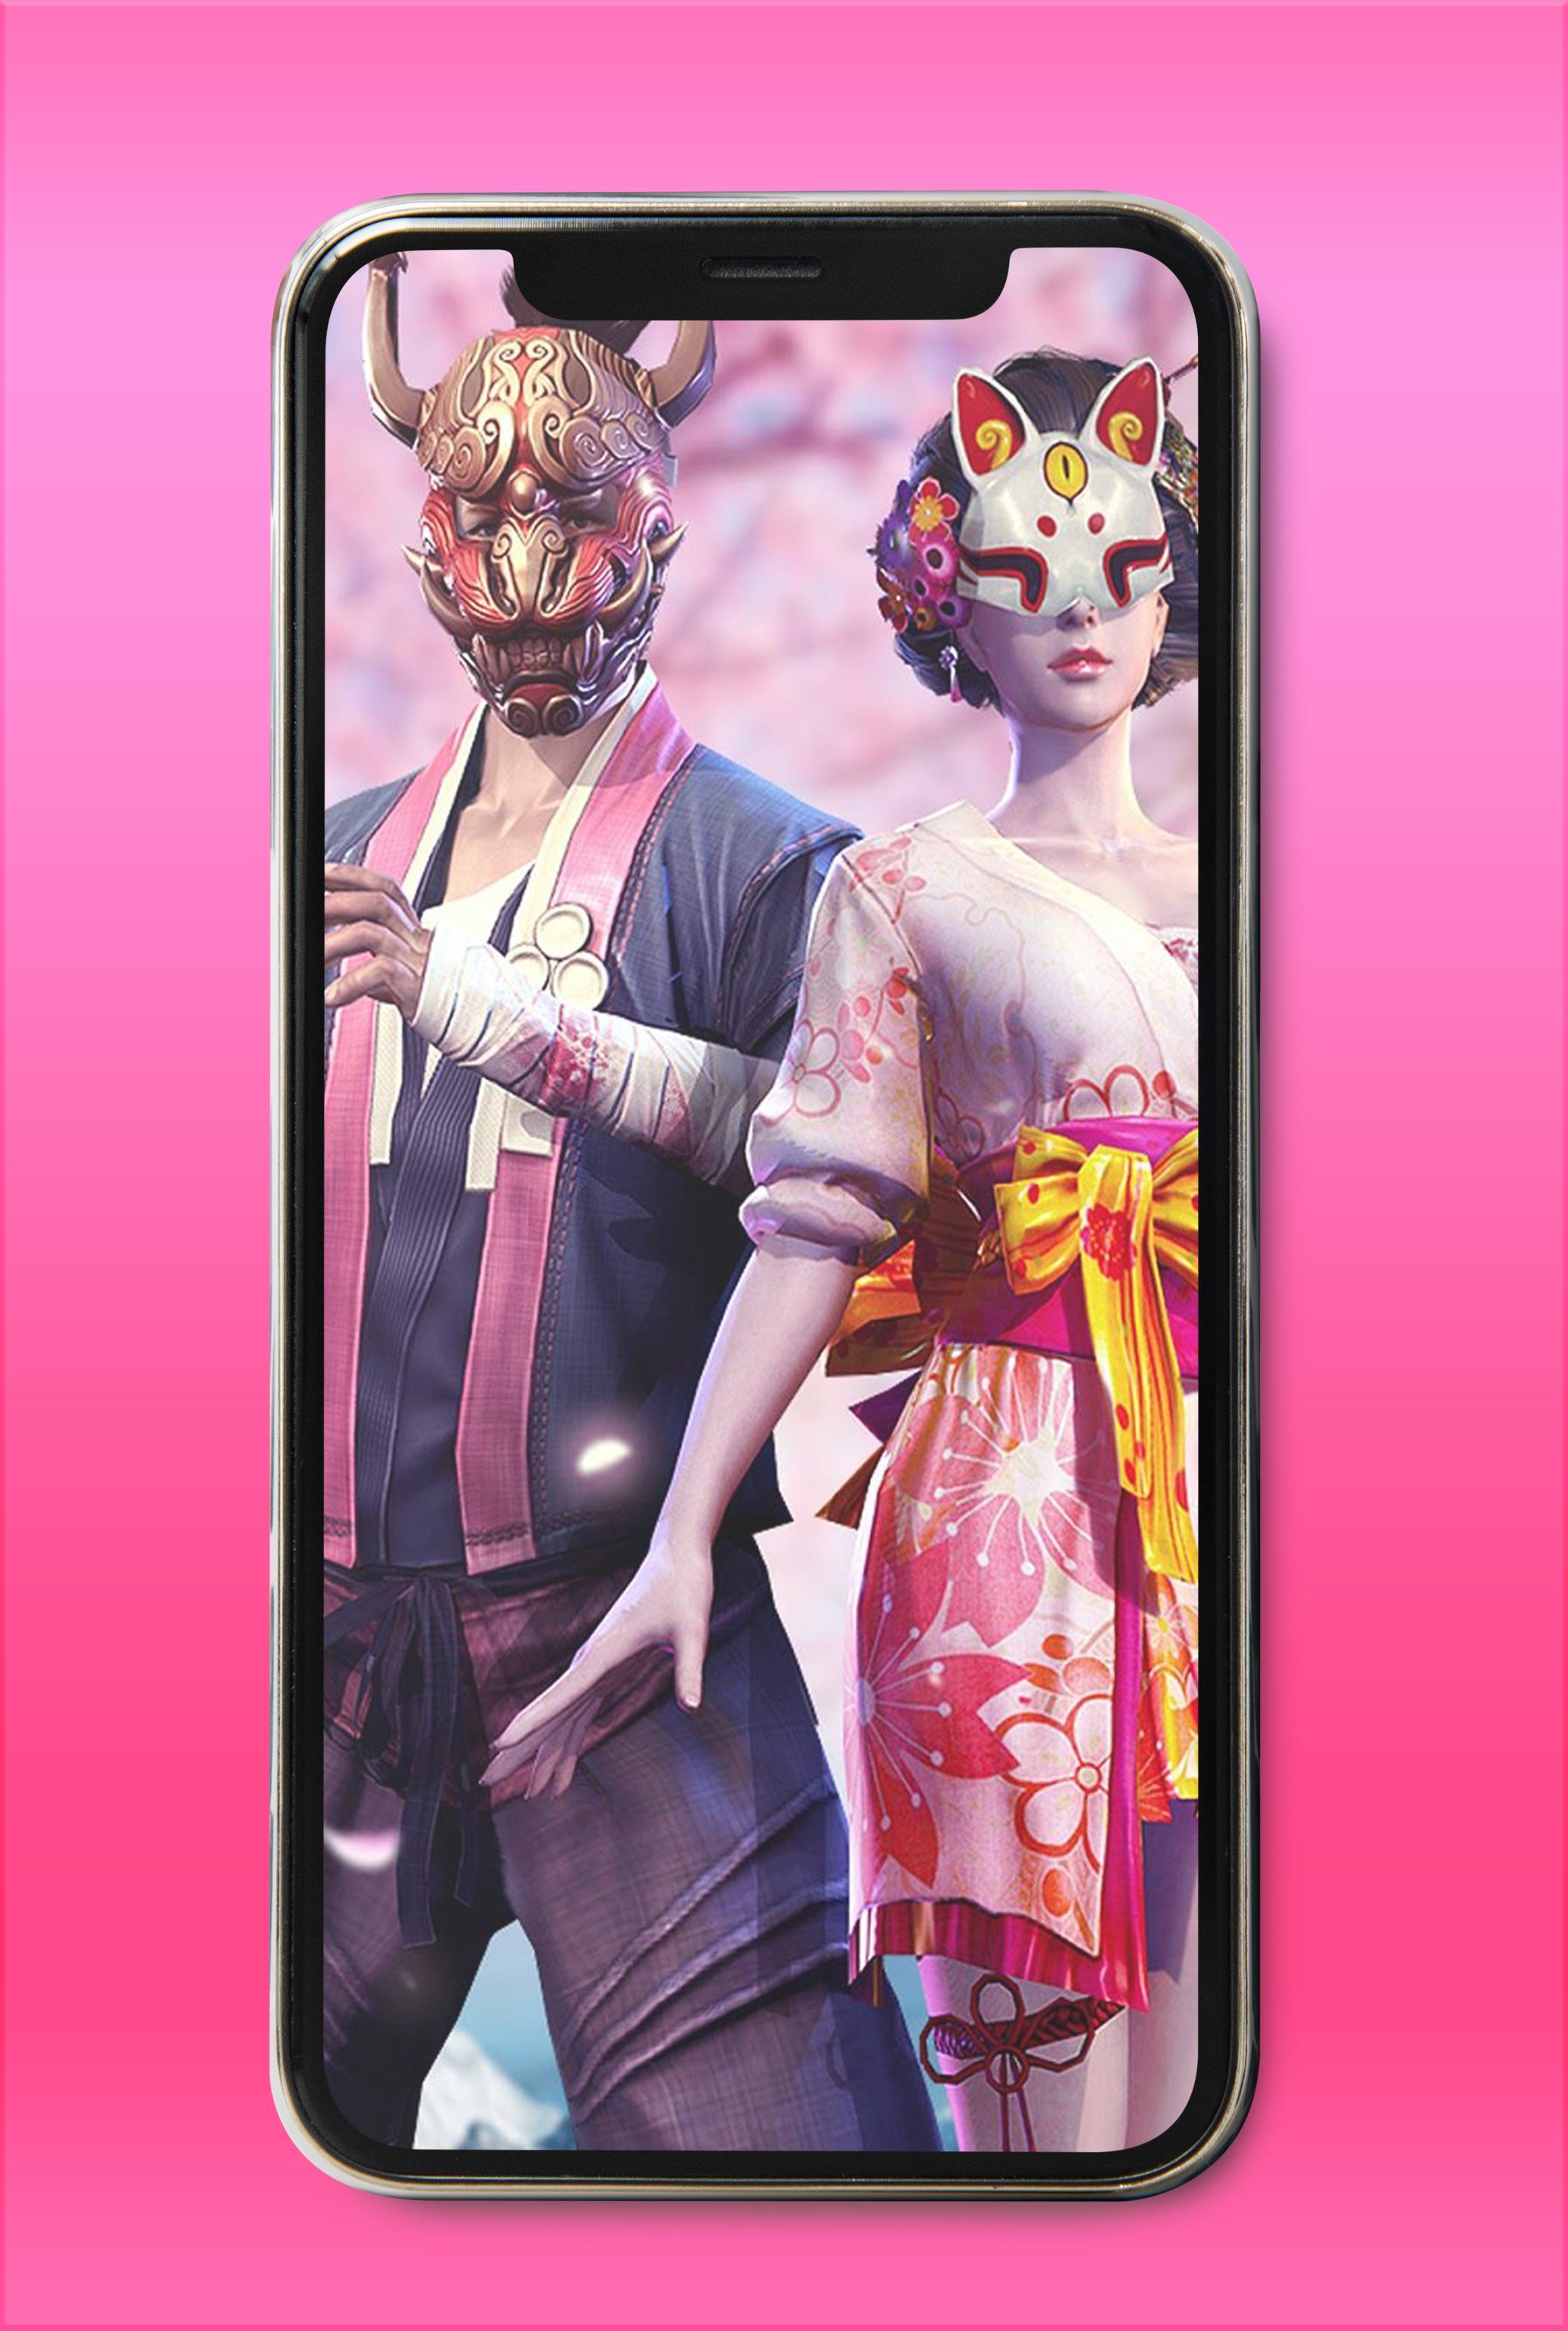 Free Fire Hd Wallpapers Garena For Android Apk Download